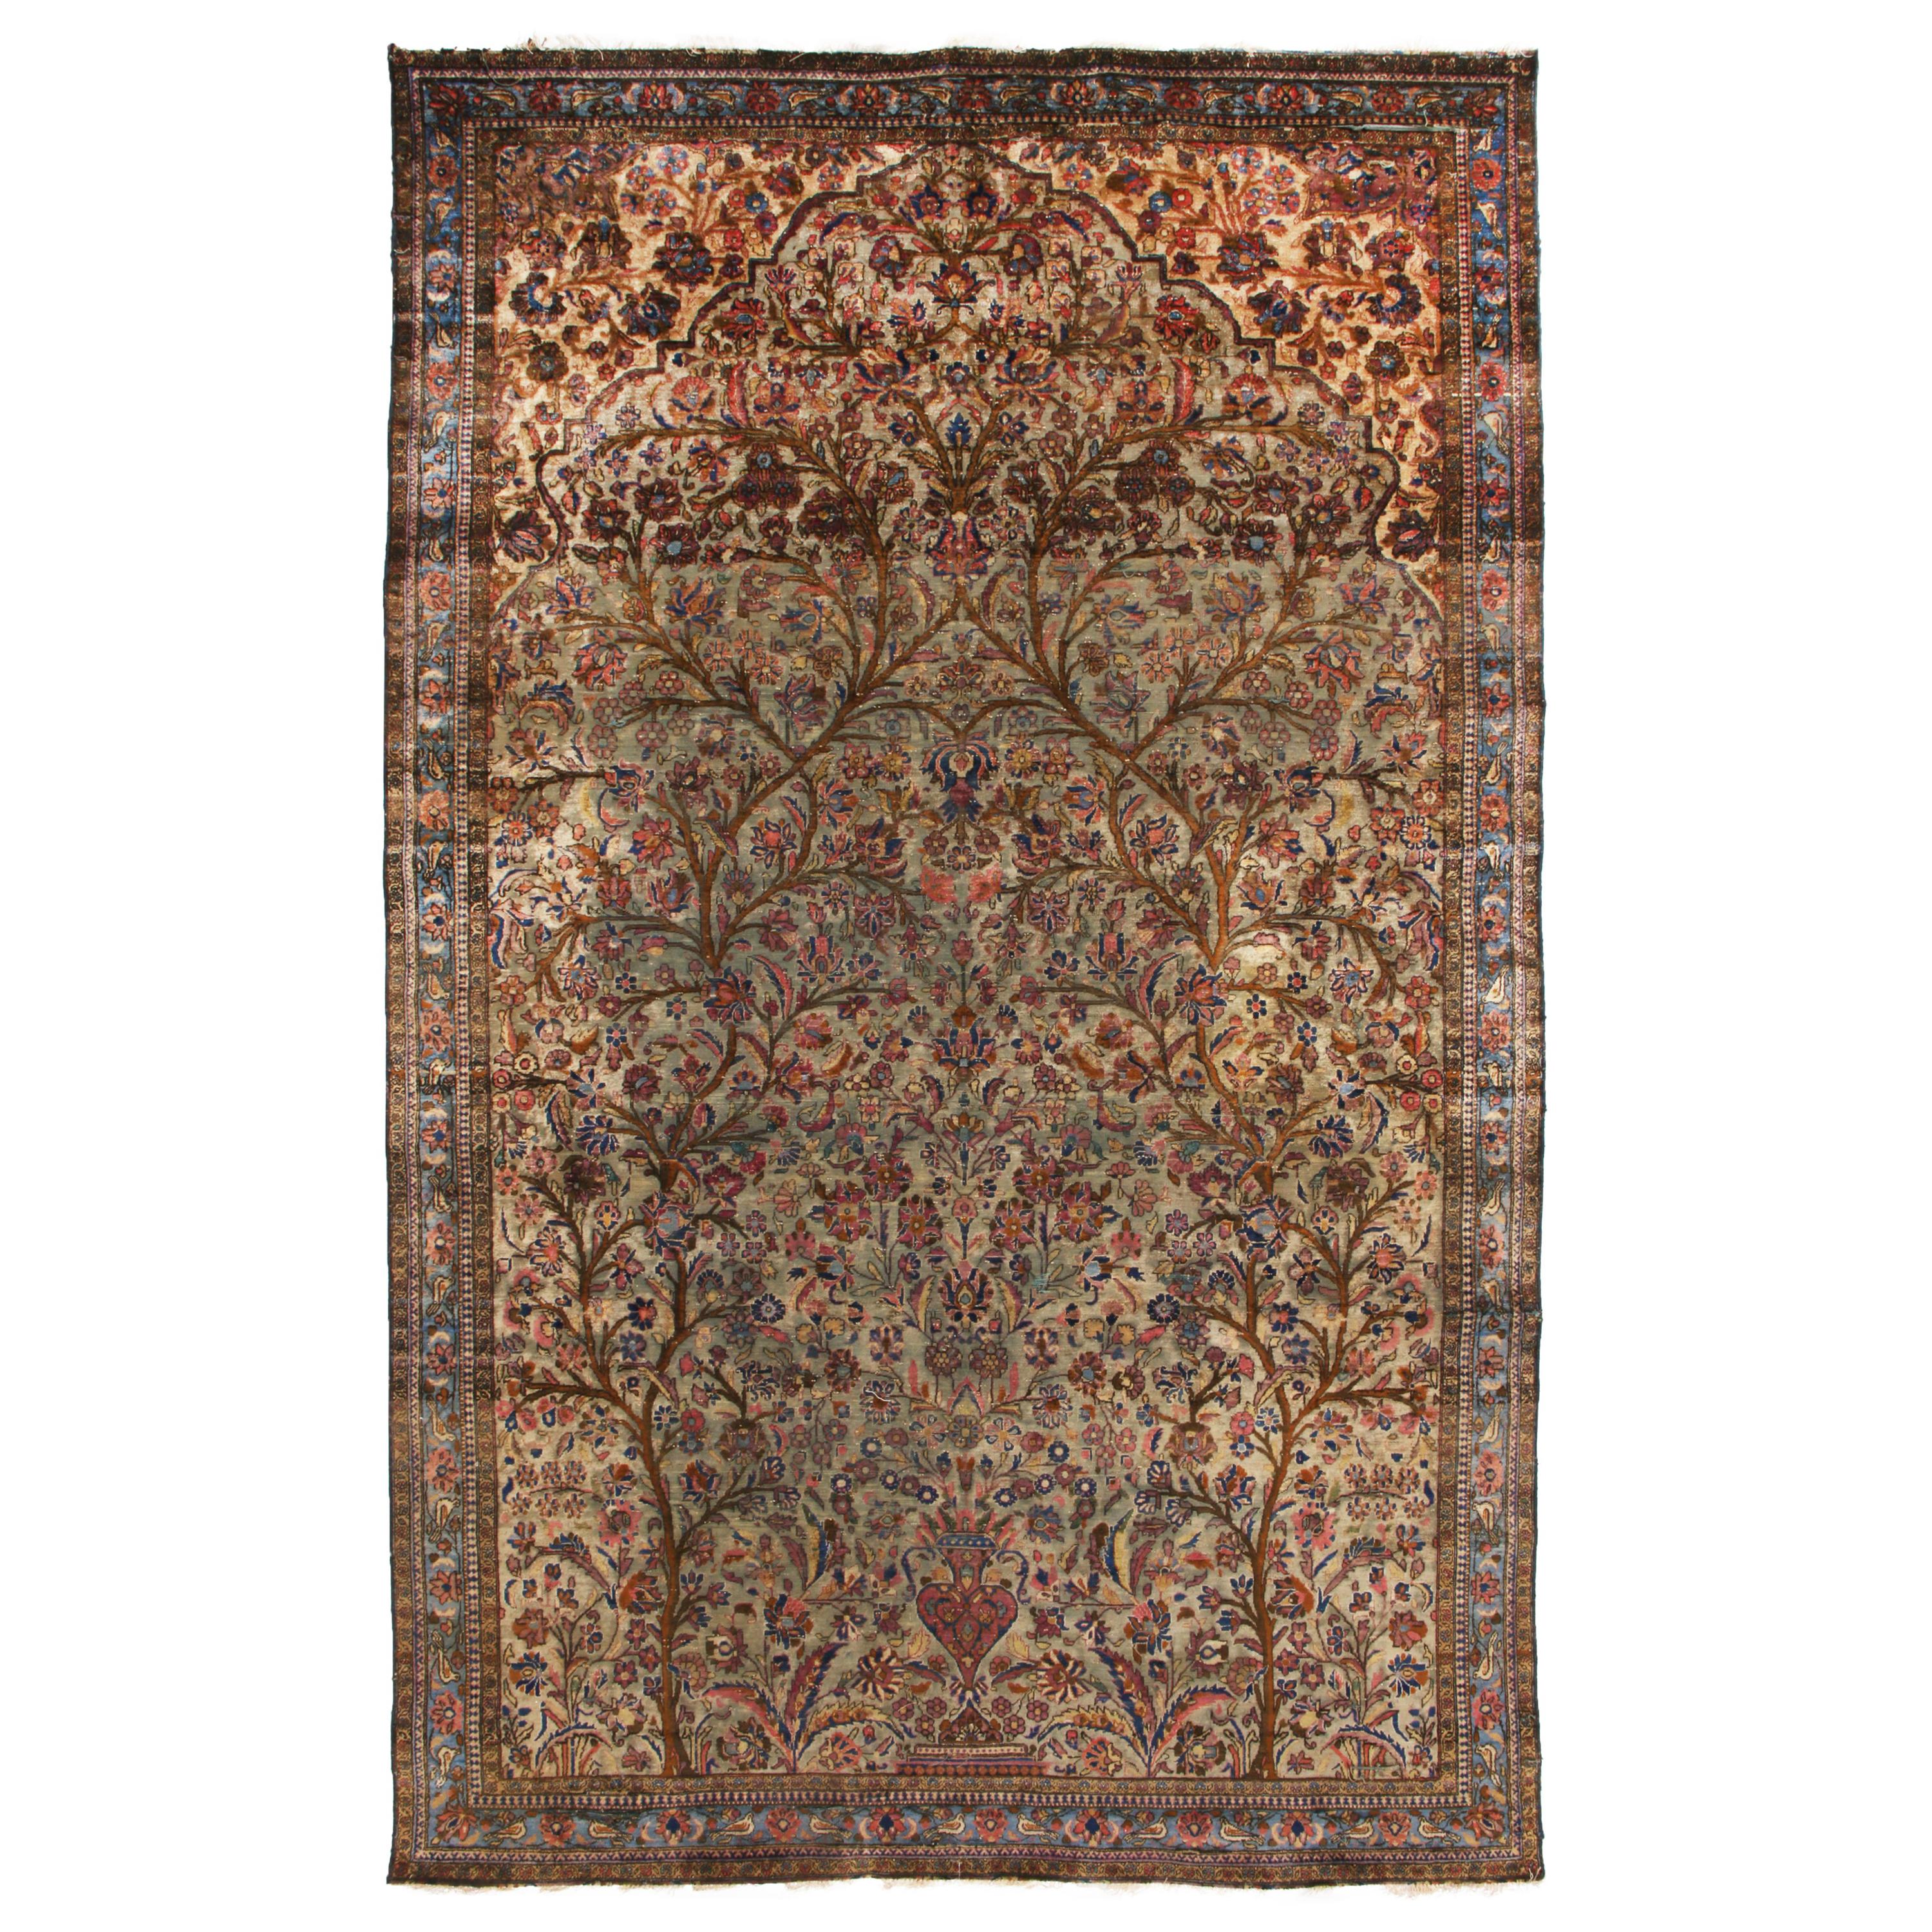 Hand-Knotted Antique Persian Rug in Beige-Brown Floral Pattern by Rug & Kilim